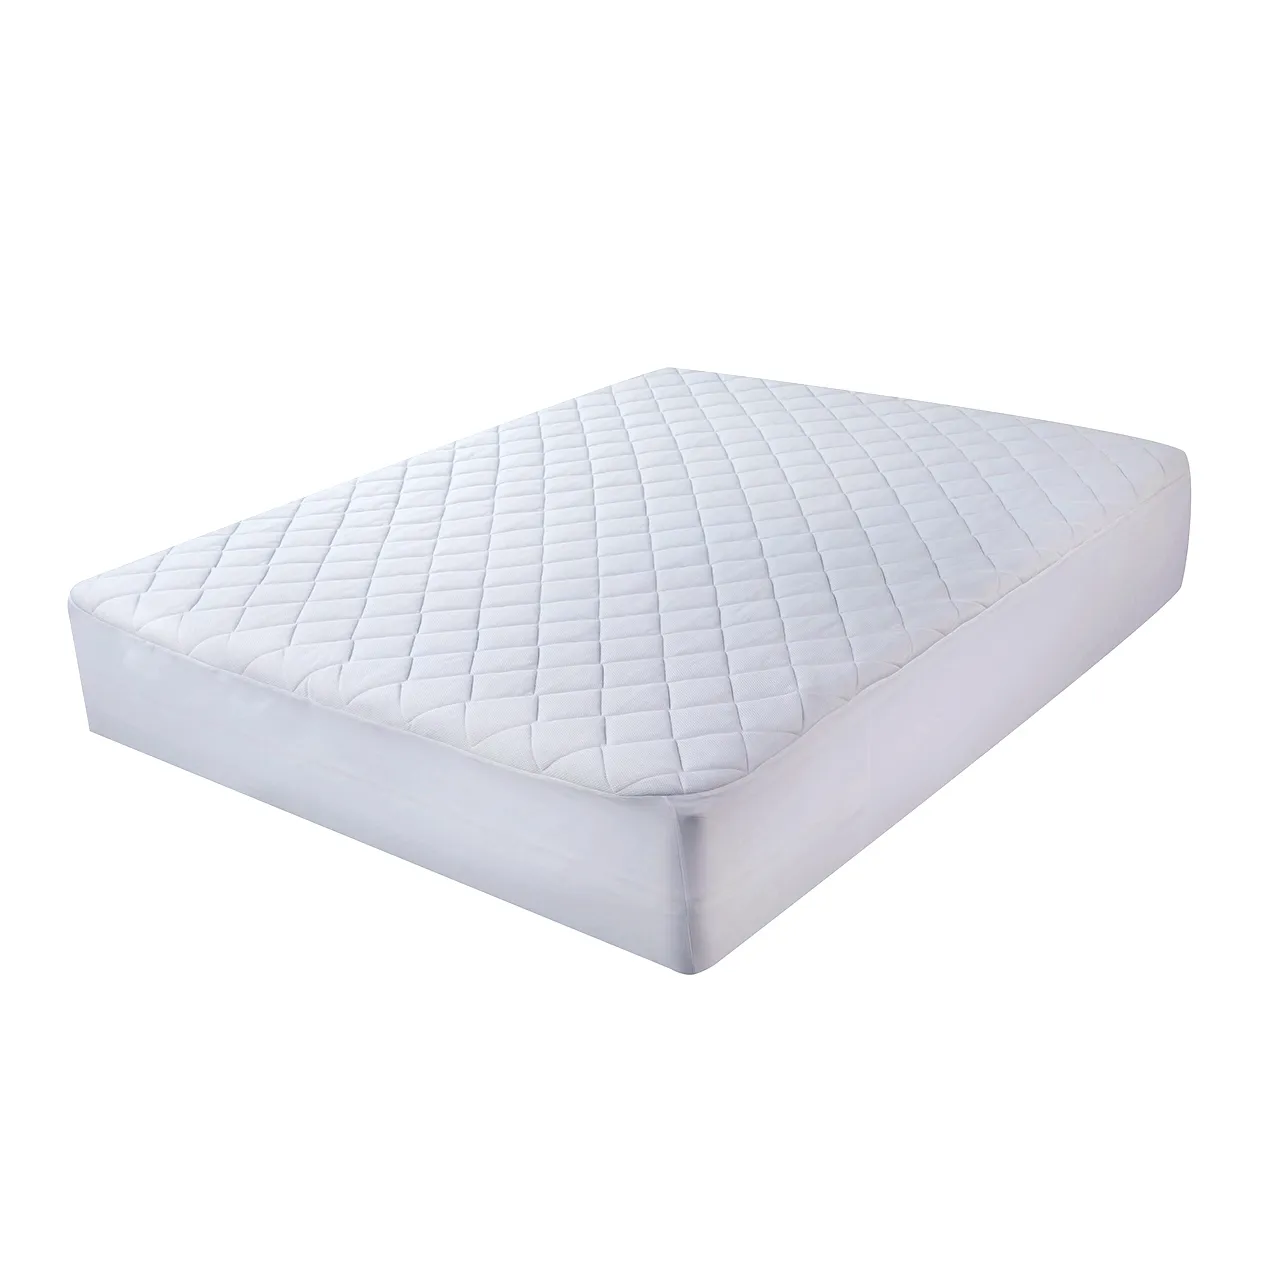 High Quality Cool Touch Waterproof Quilted Mattress Pad Cover